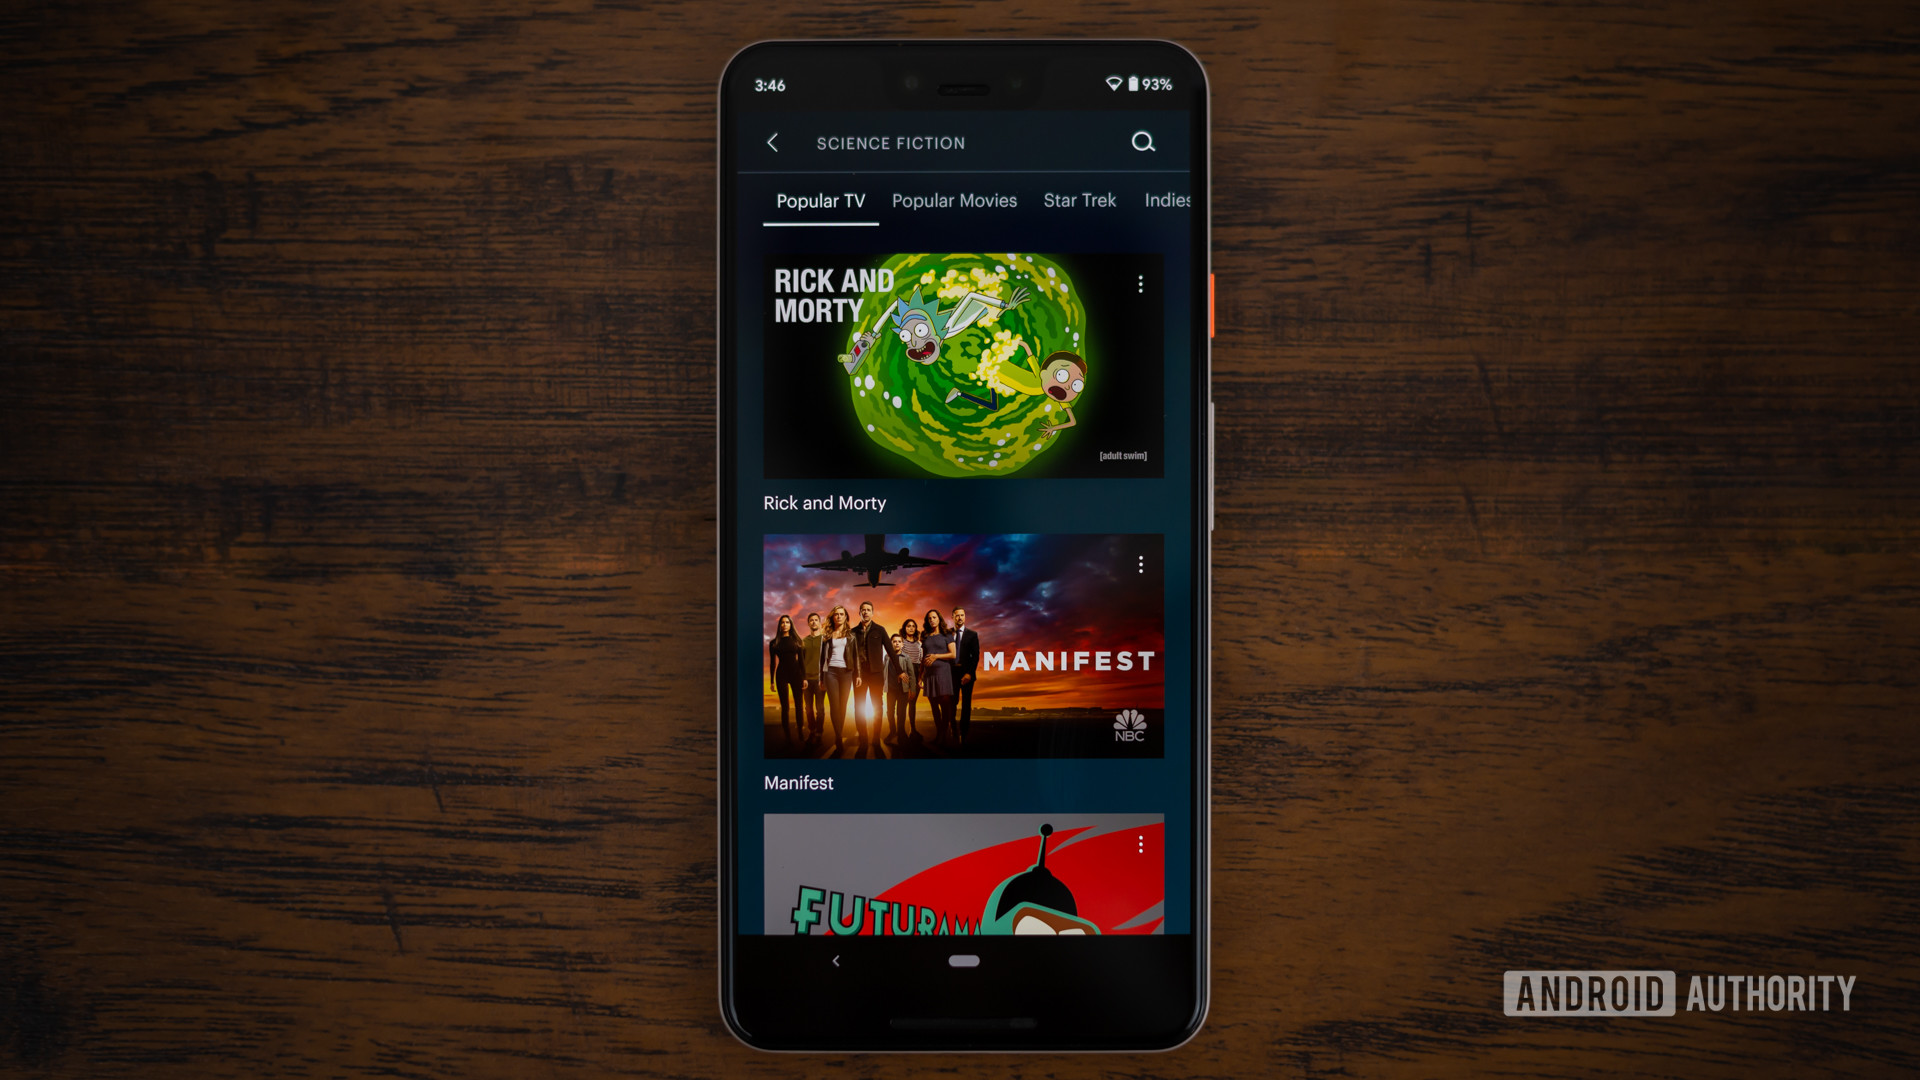 Hulu sci-fi section shown on a smartphone: how many people can watch Hulu at once